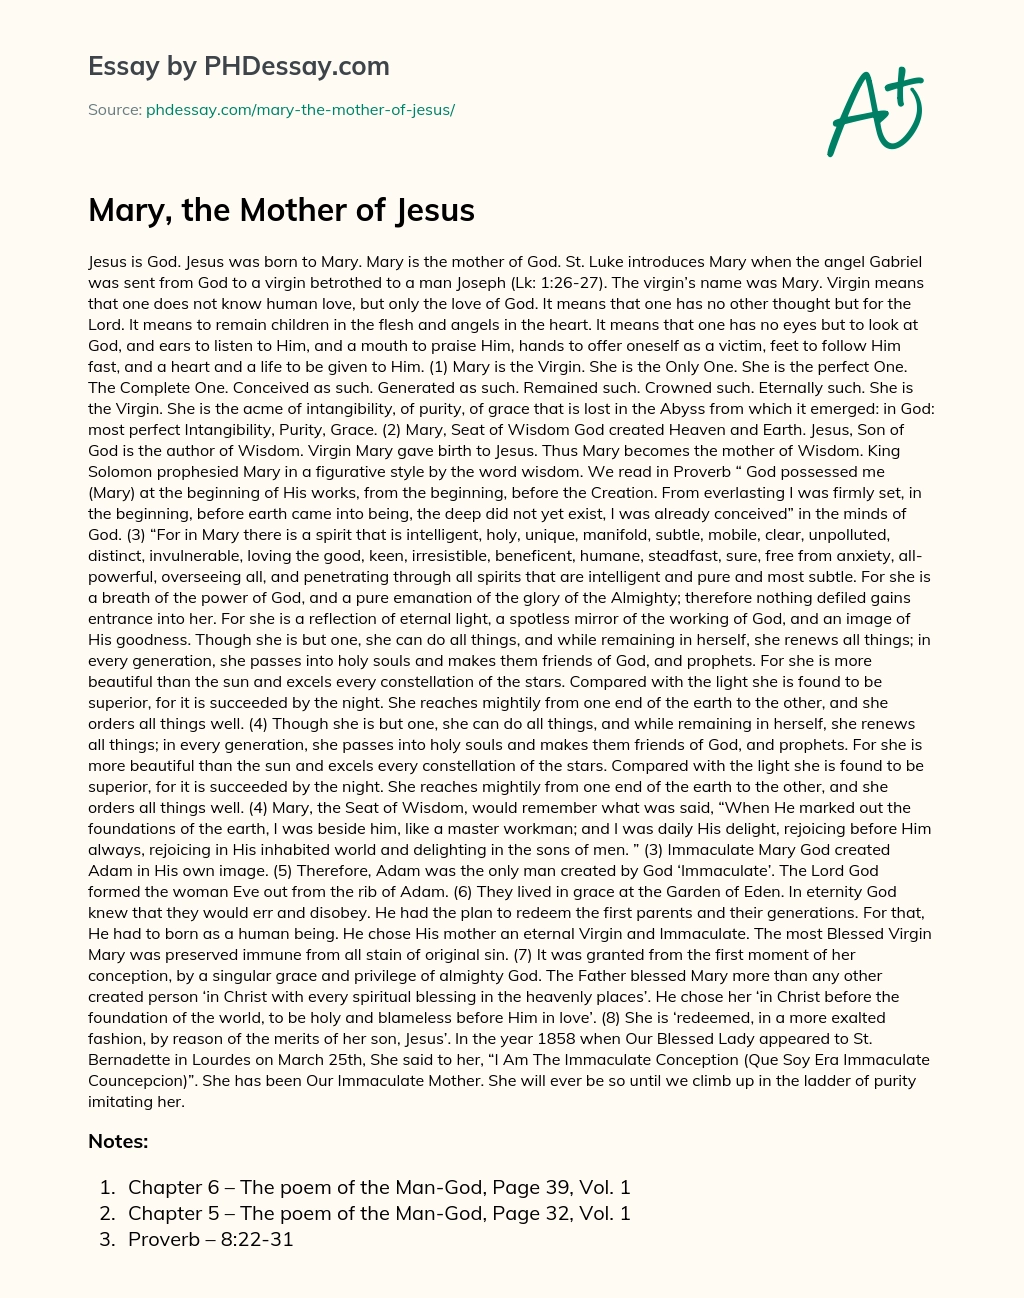 Mary, the Mother of Jesus essay